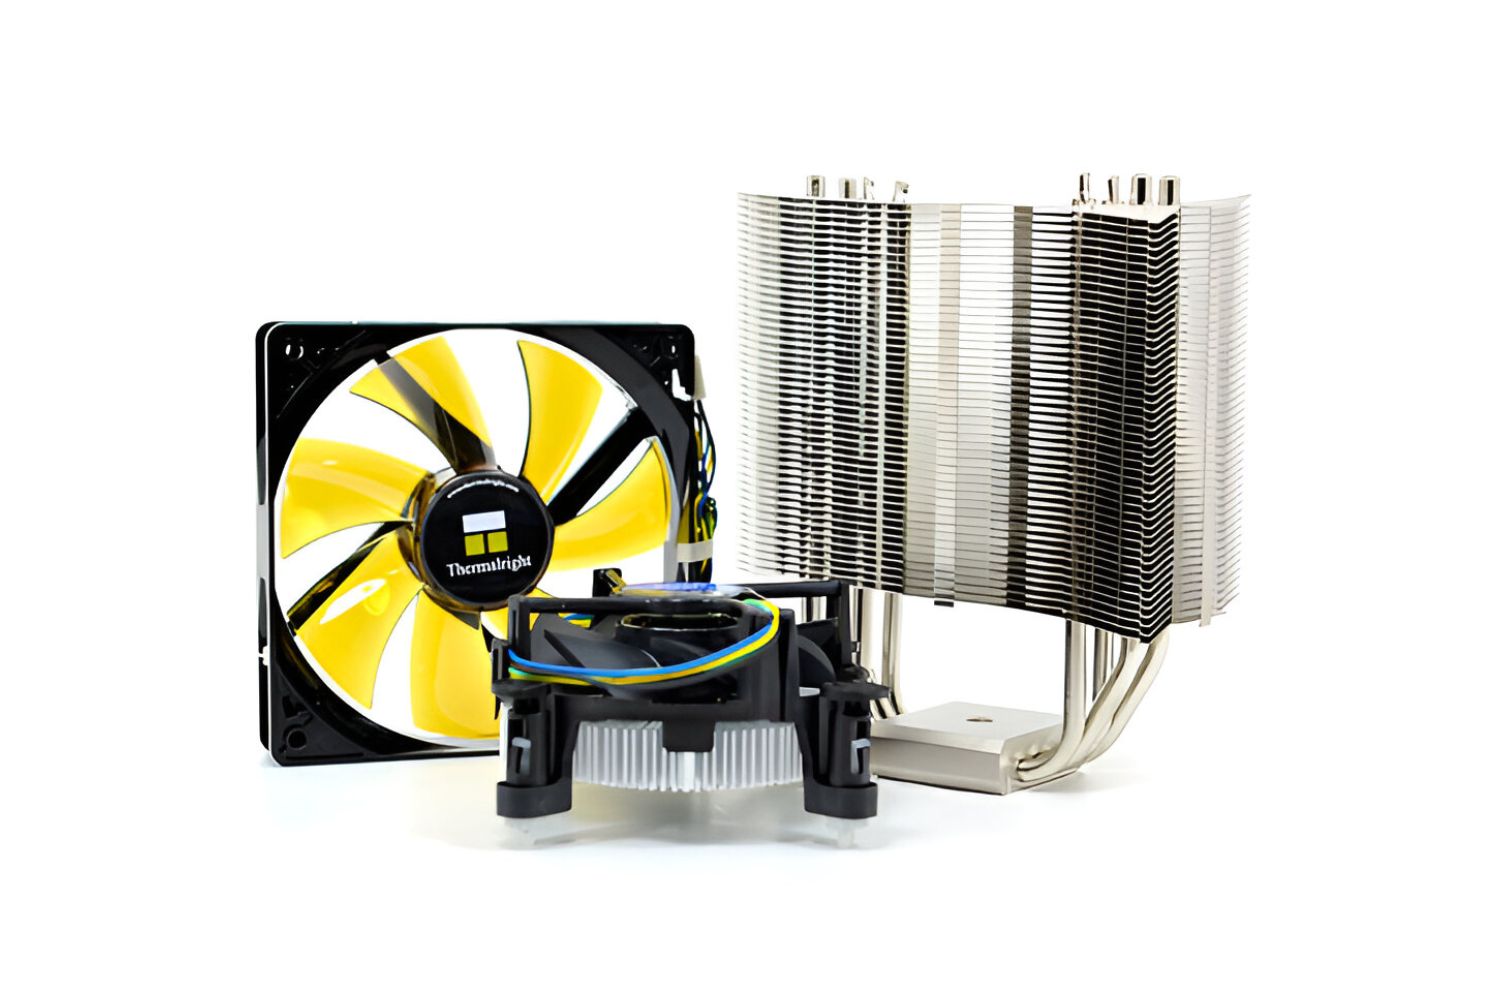 What Is The Best CPU Cooler For The Intel Core I7 870